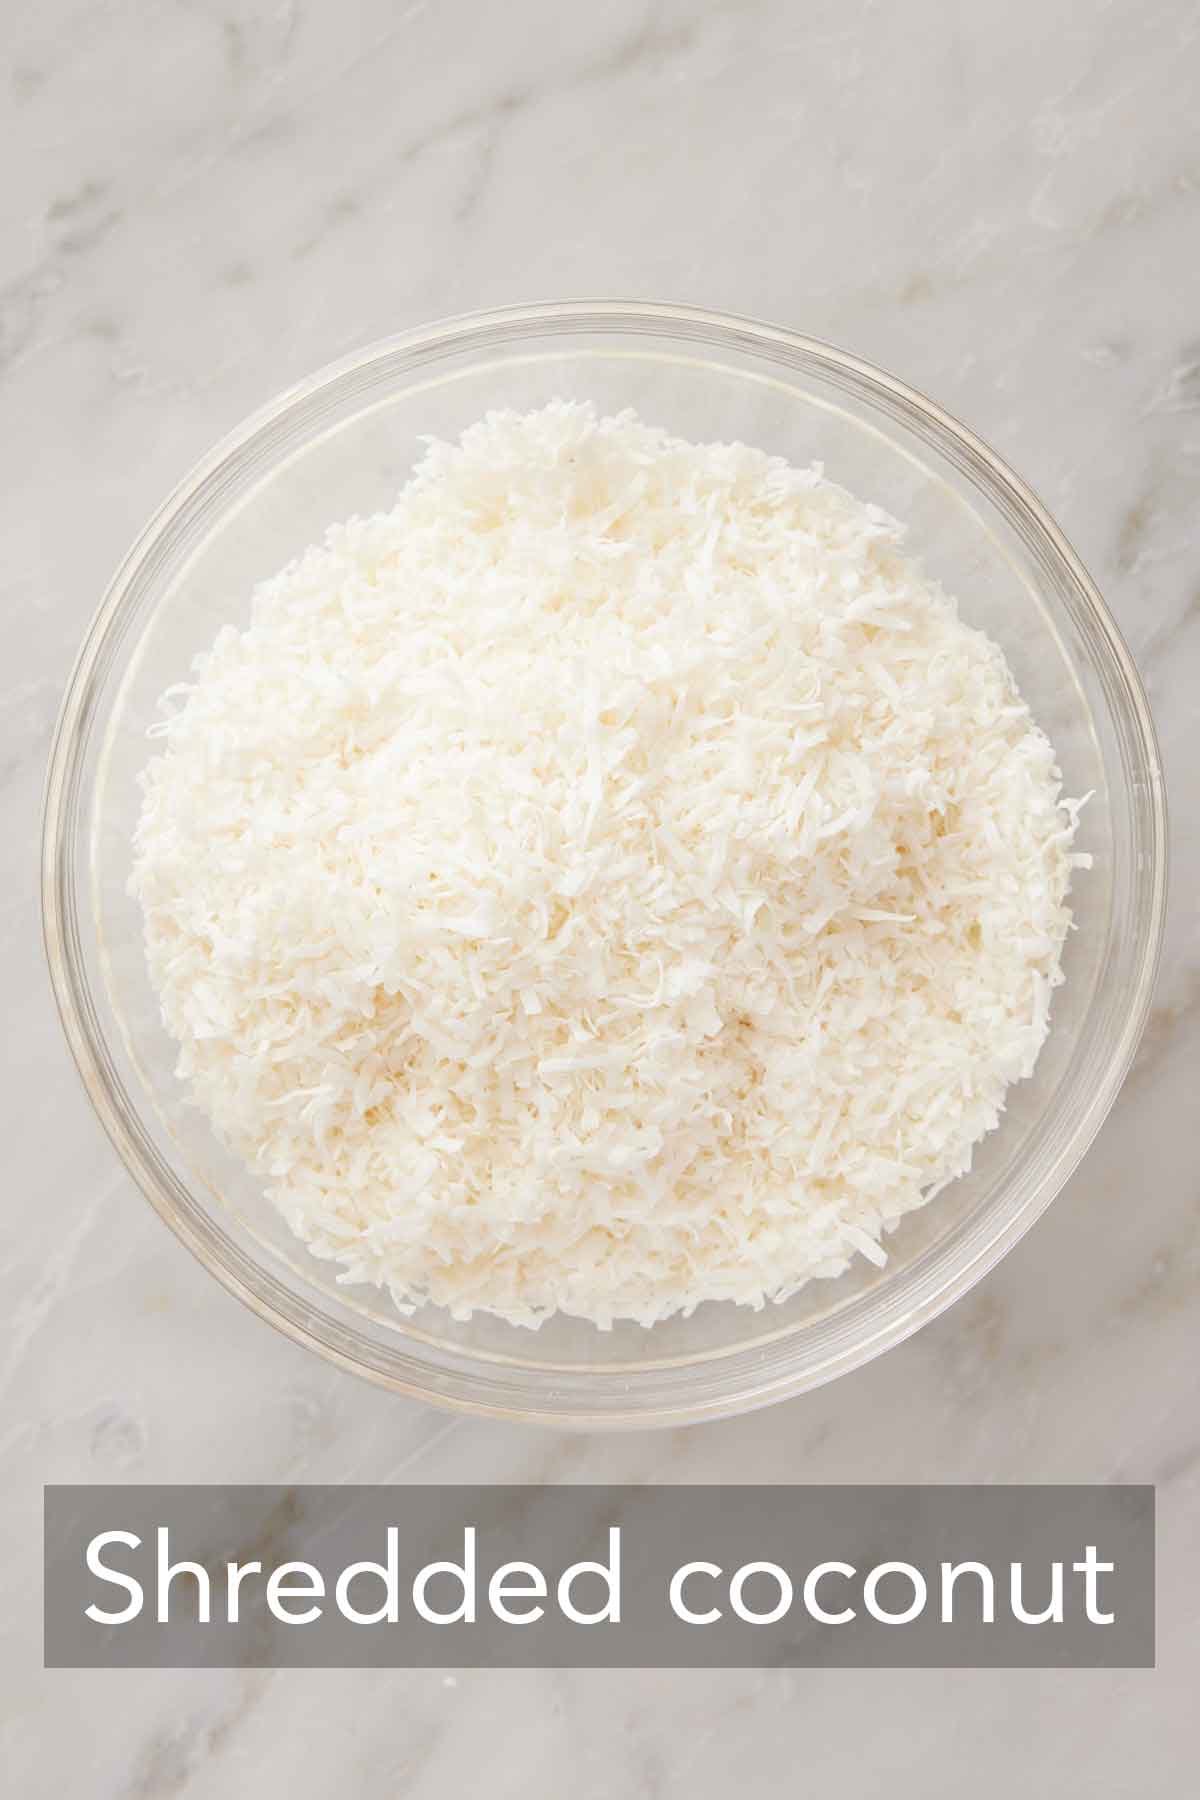 A bowl of shredded coconut.